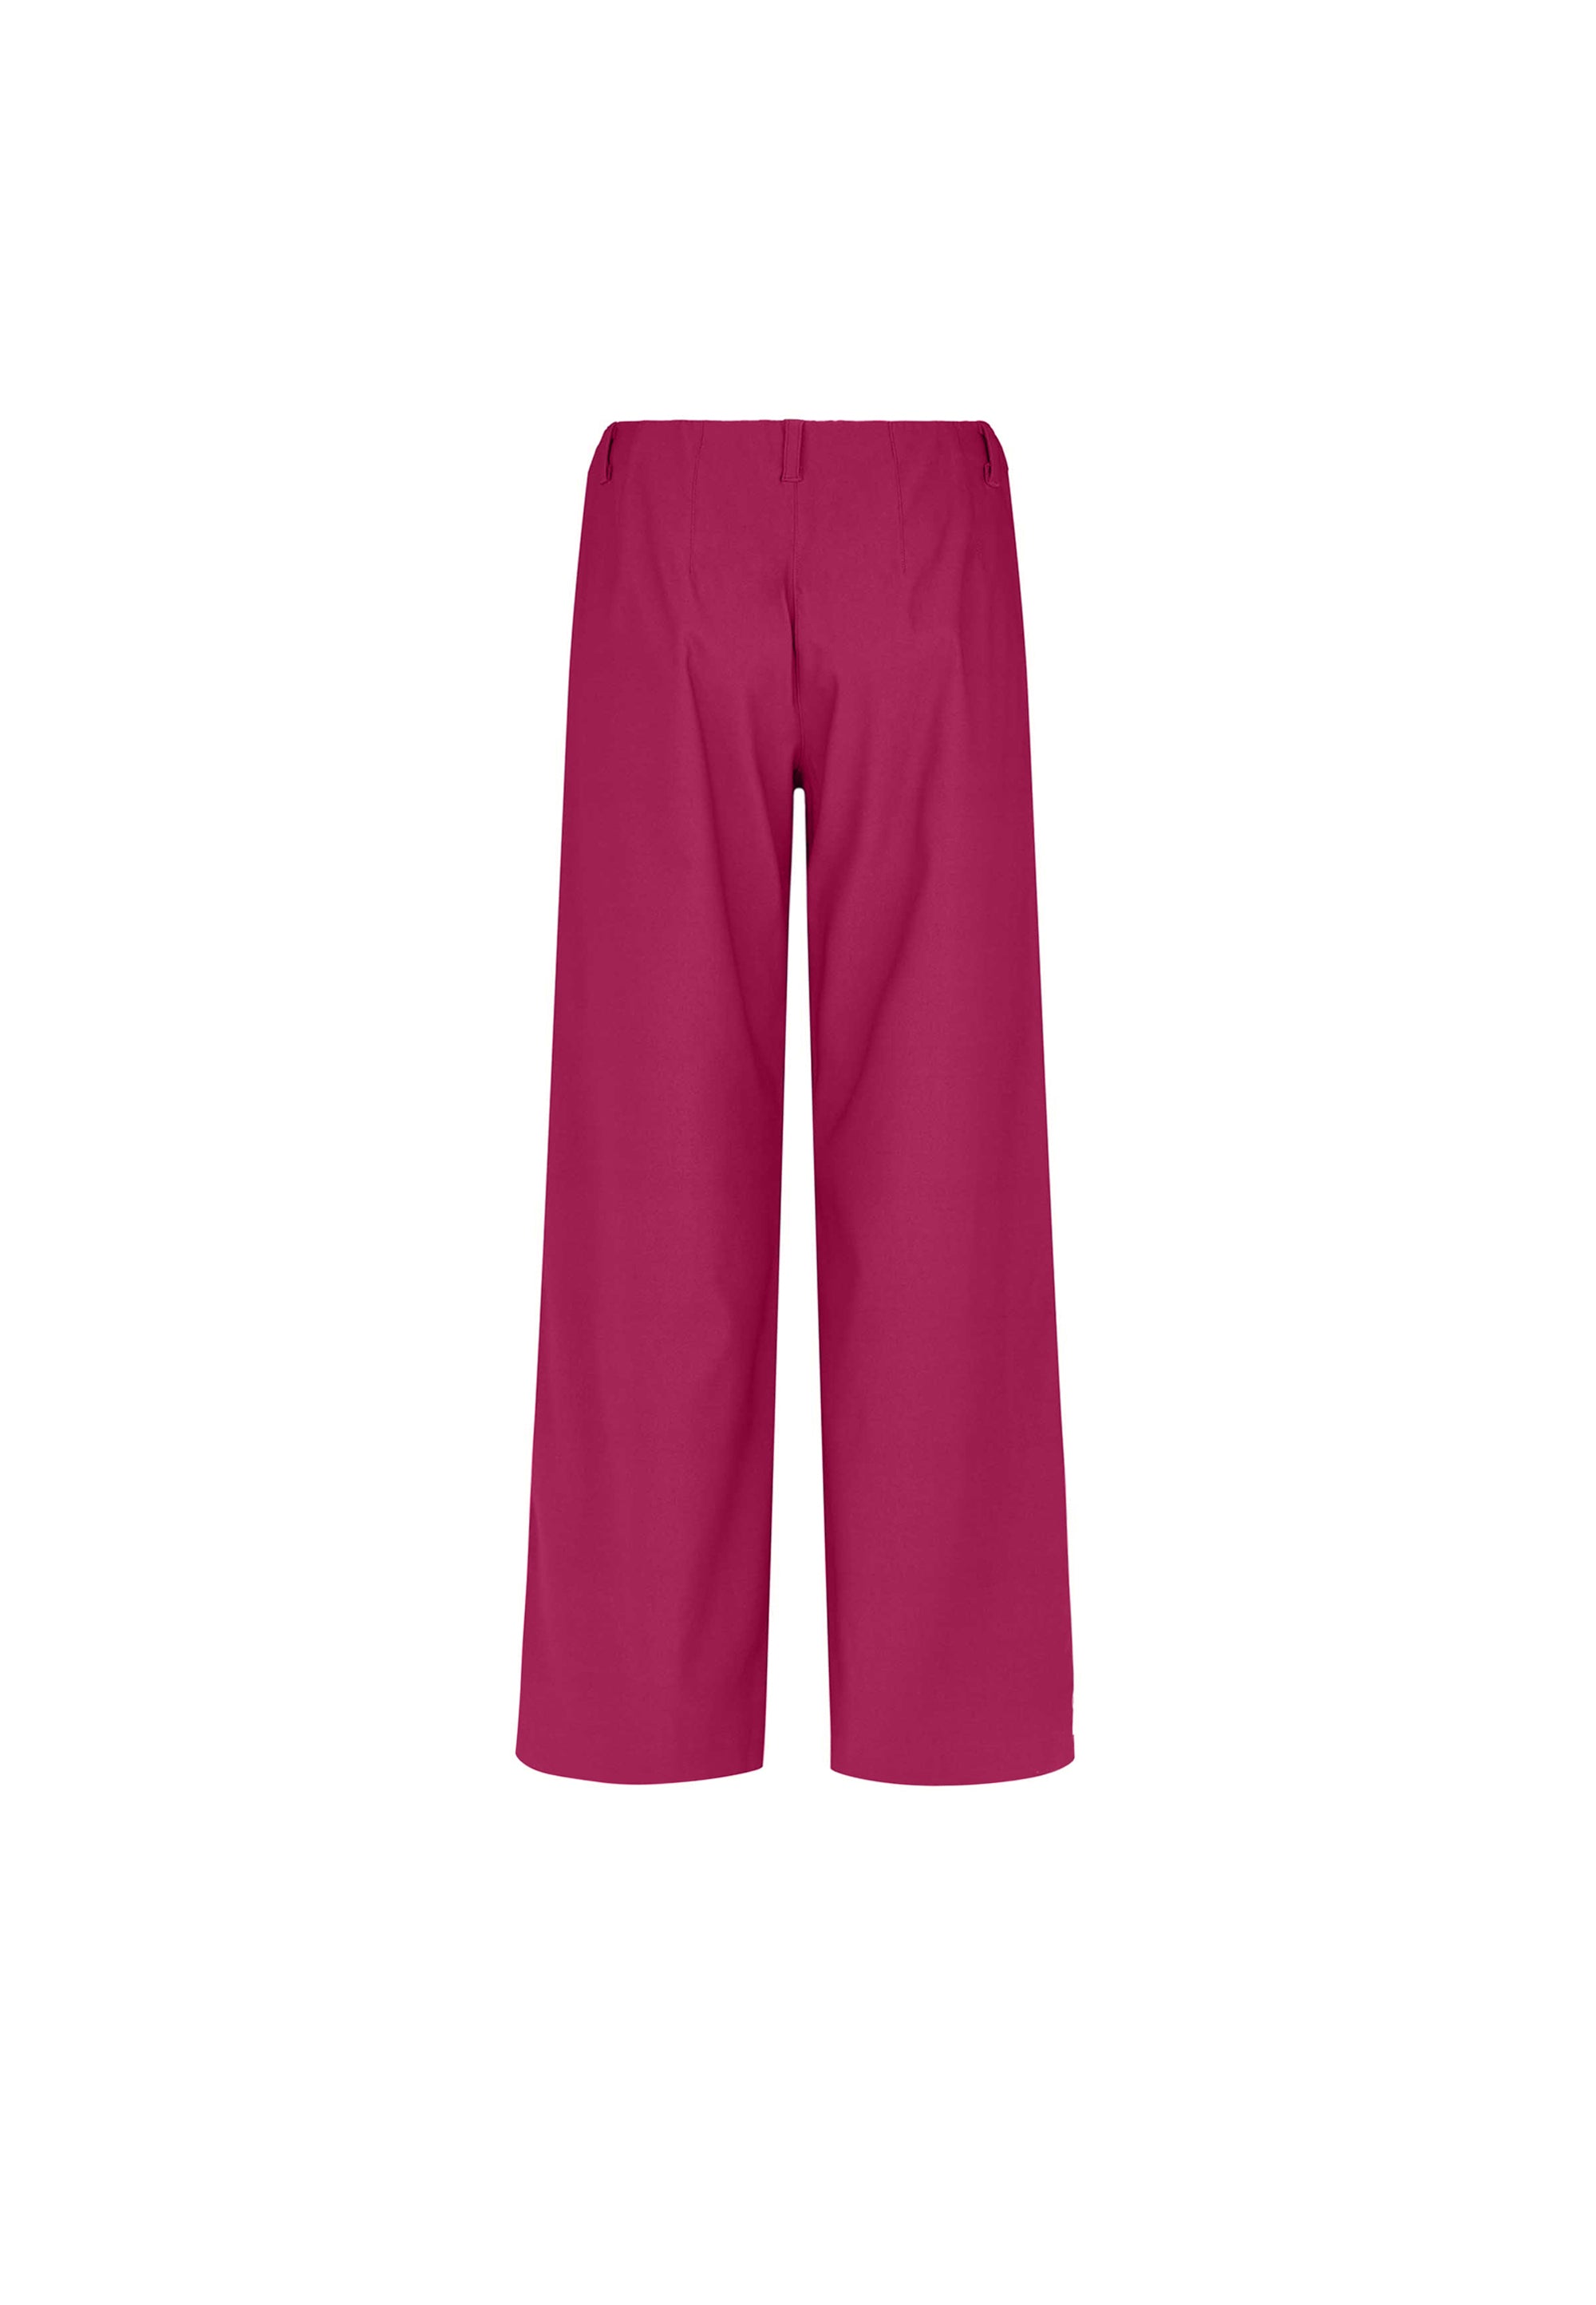 LAURIE Donna Loose - Short Length Trousers LOOSE 31100 Ruby